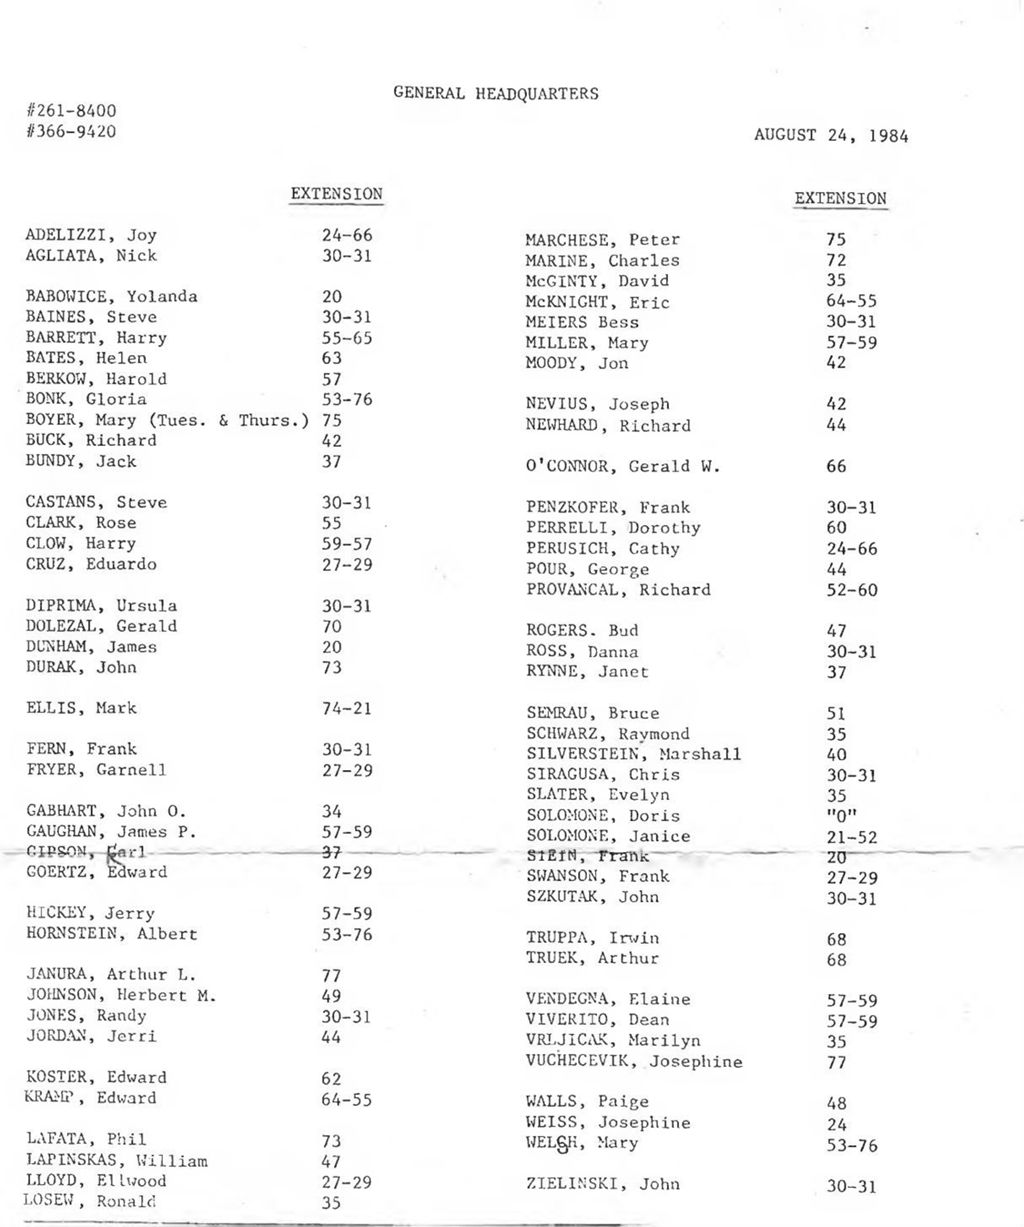 List of employees, phone numbers, and extensions at General Headquarters, Forest Preserve District of Cook County, 1984